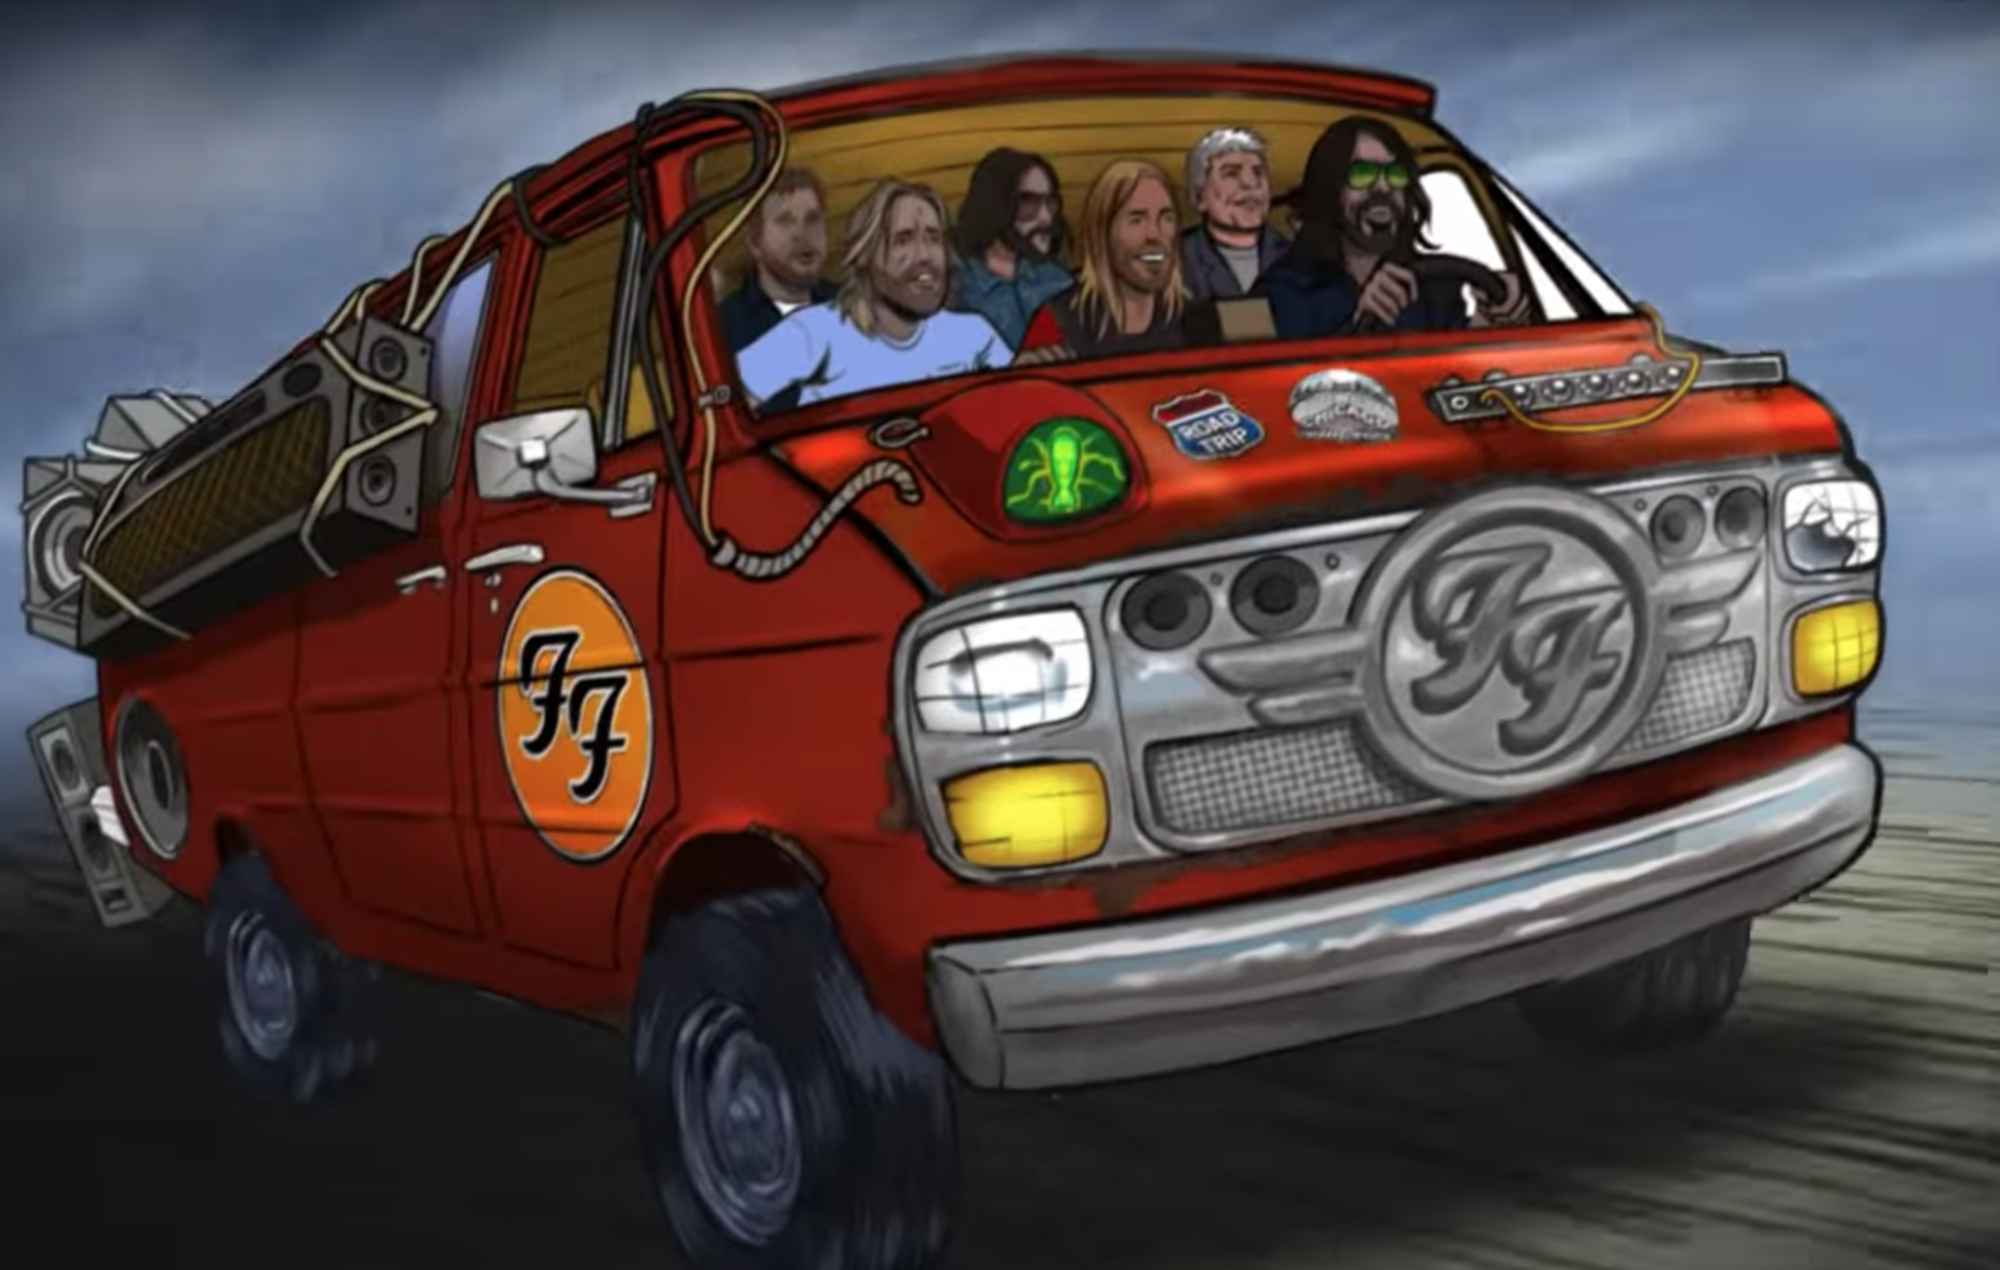 New Foo Fighters pinball machine coming soon – see the trailer